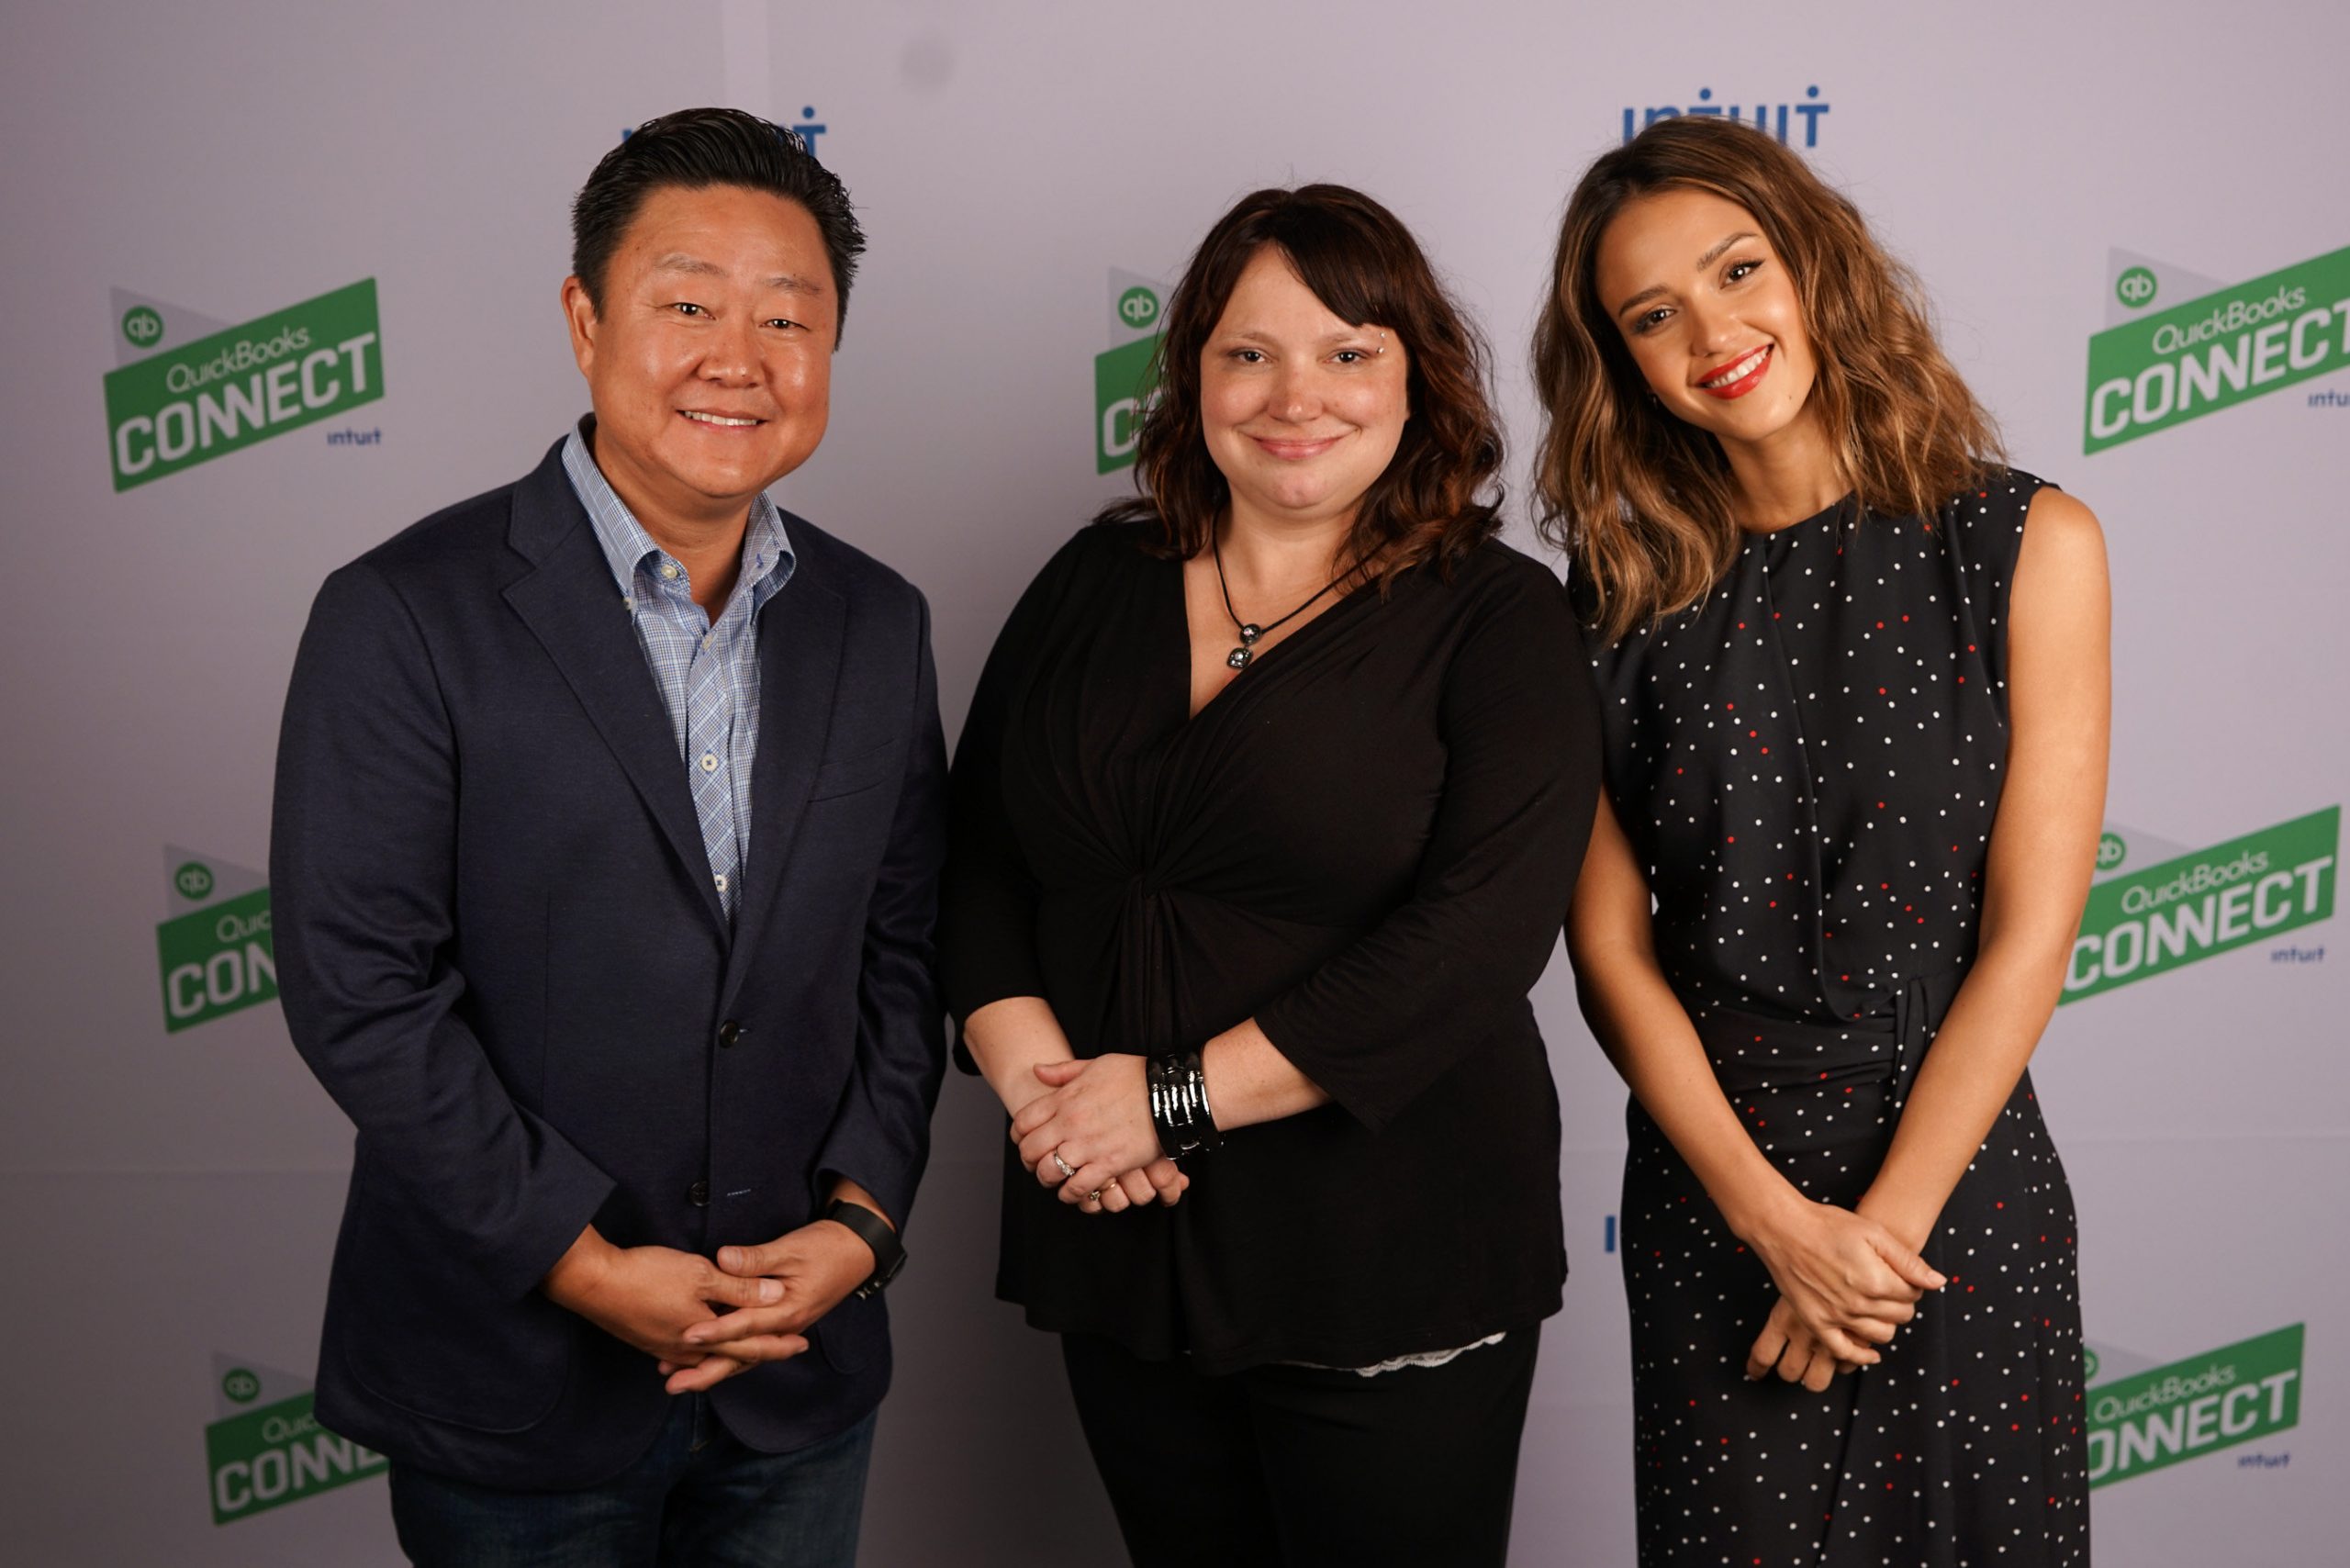 Melissa with Jessica Alba and Brian Lee at QB connect 2015